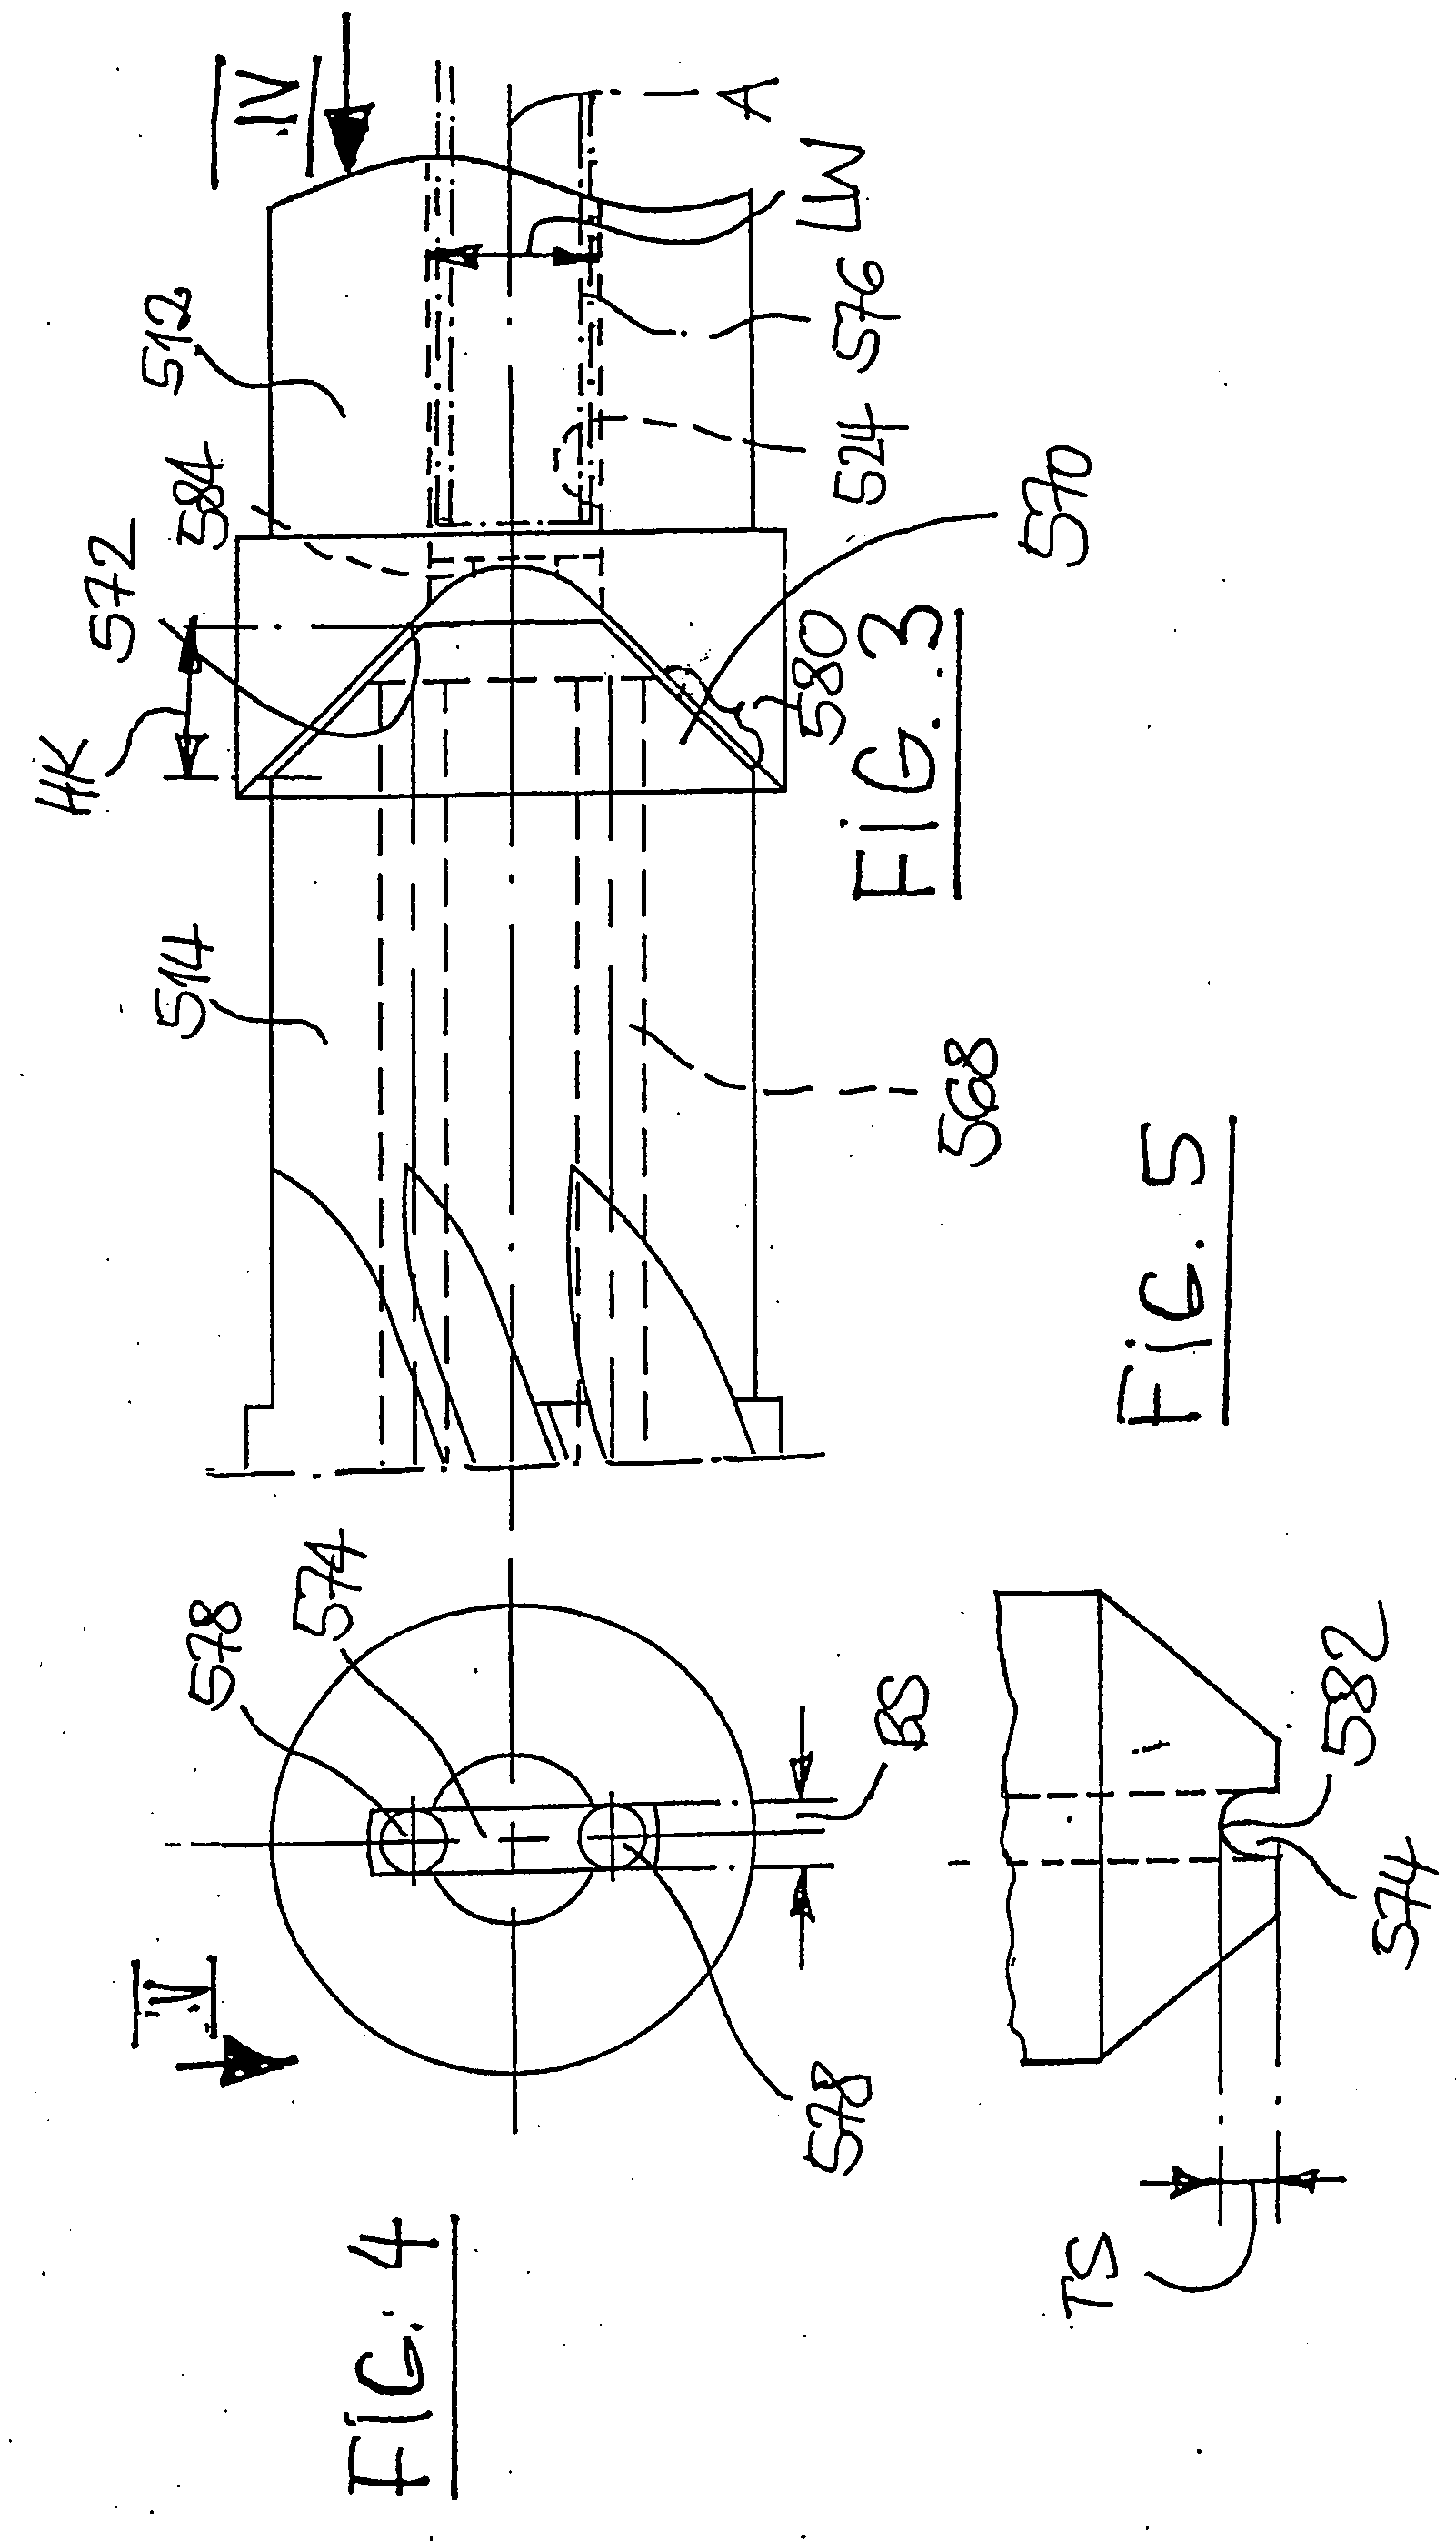 Shaft tool and associated coolant/lubricant feeding point